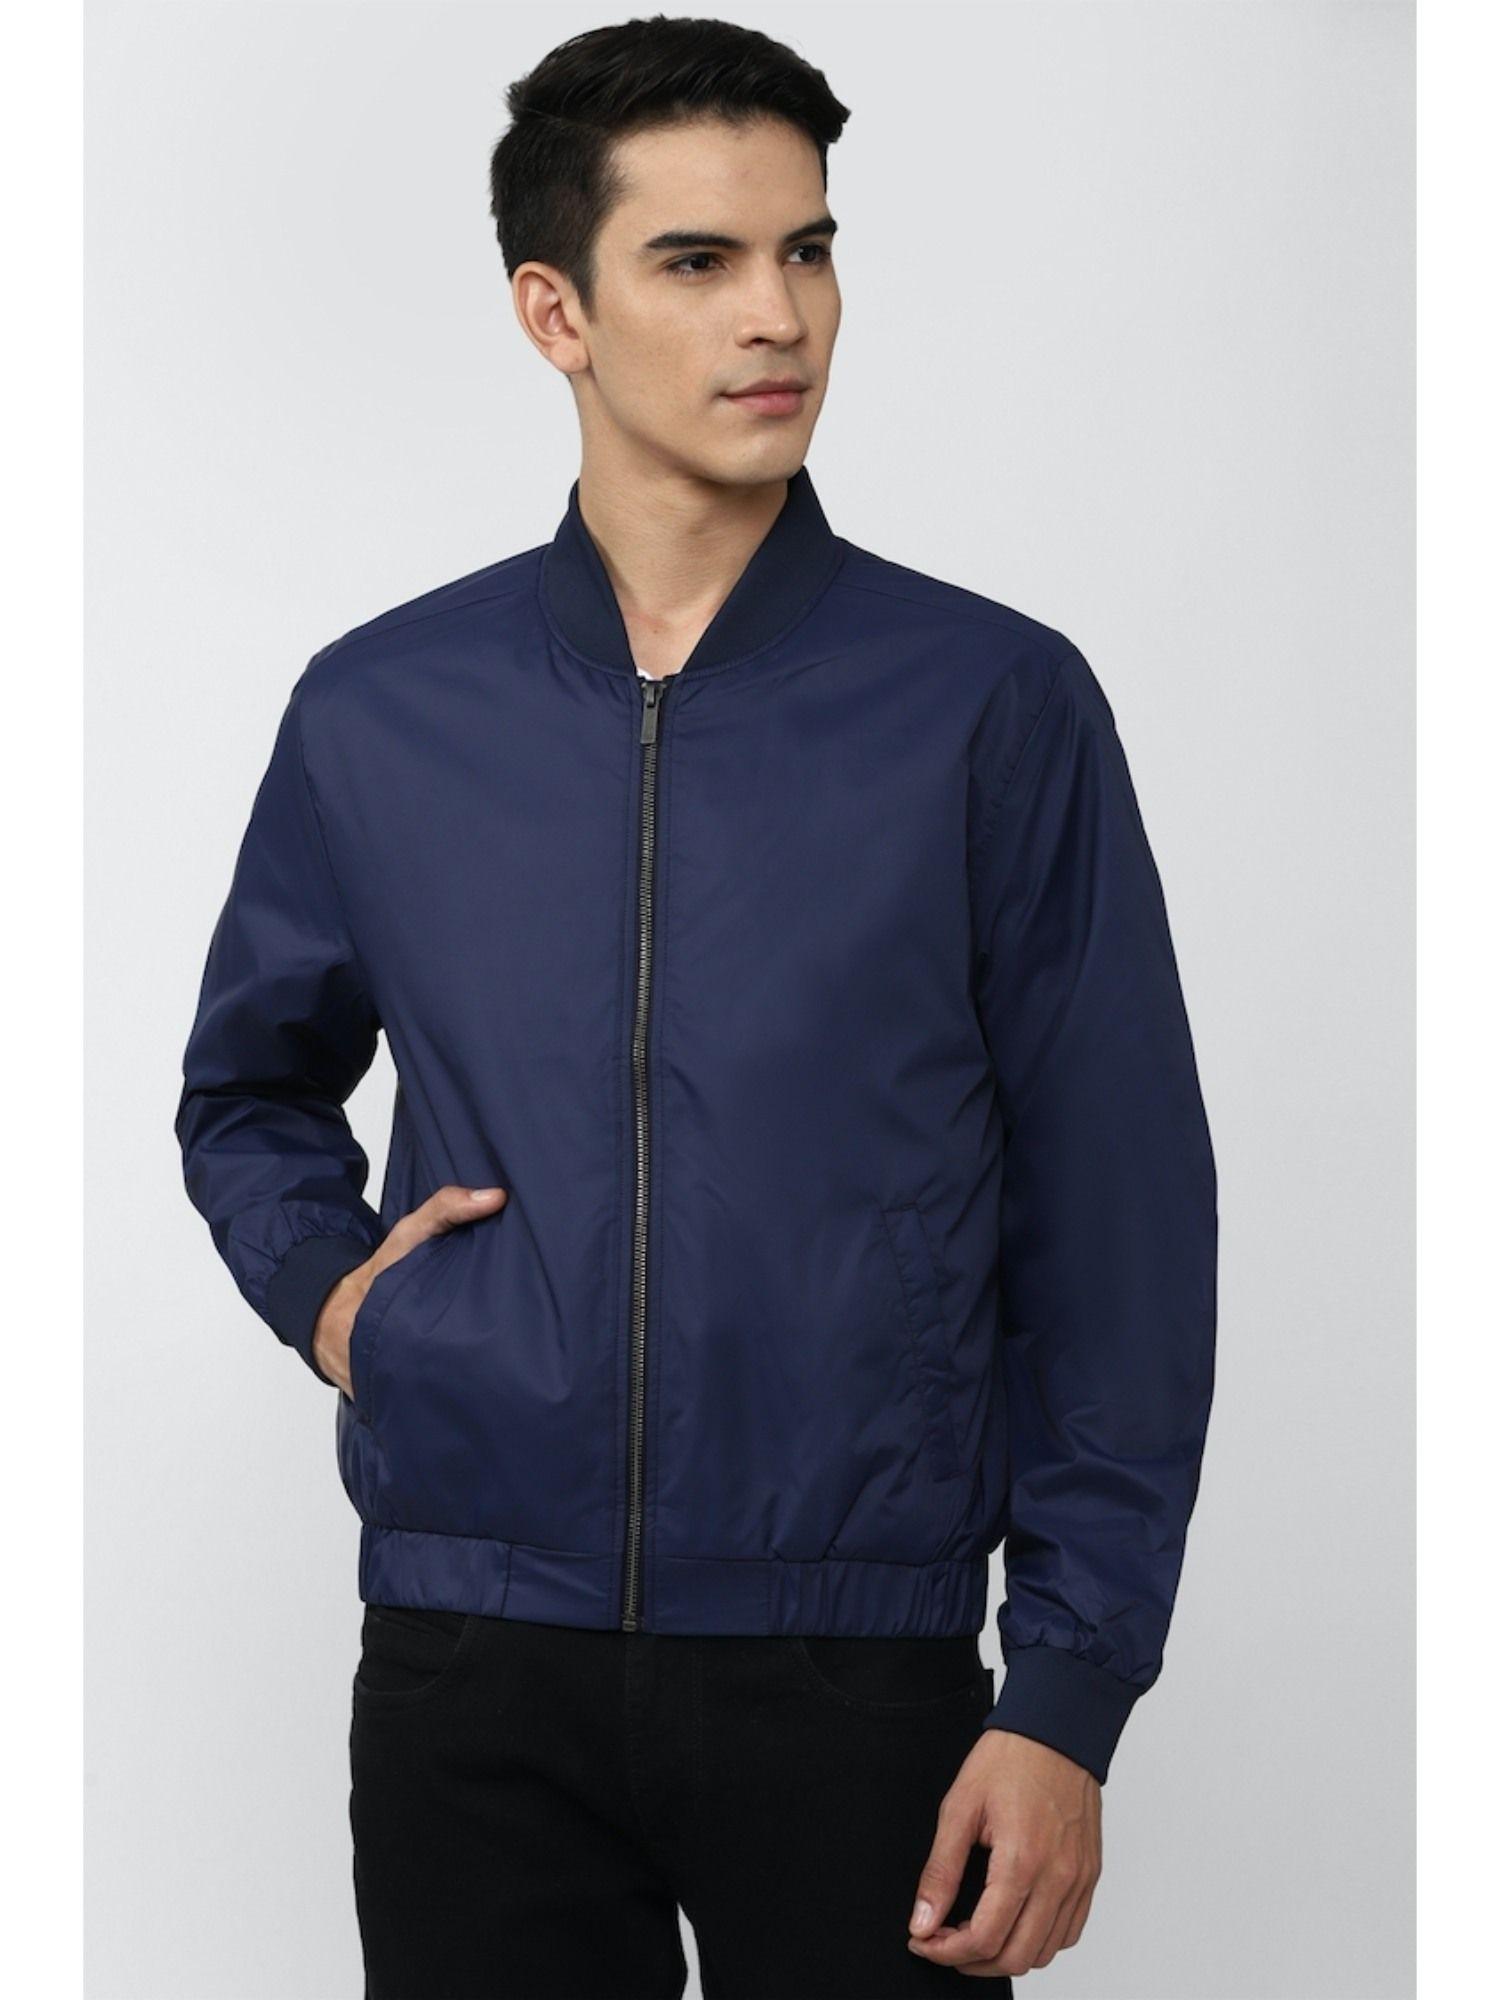 solid navy solid jackets